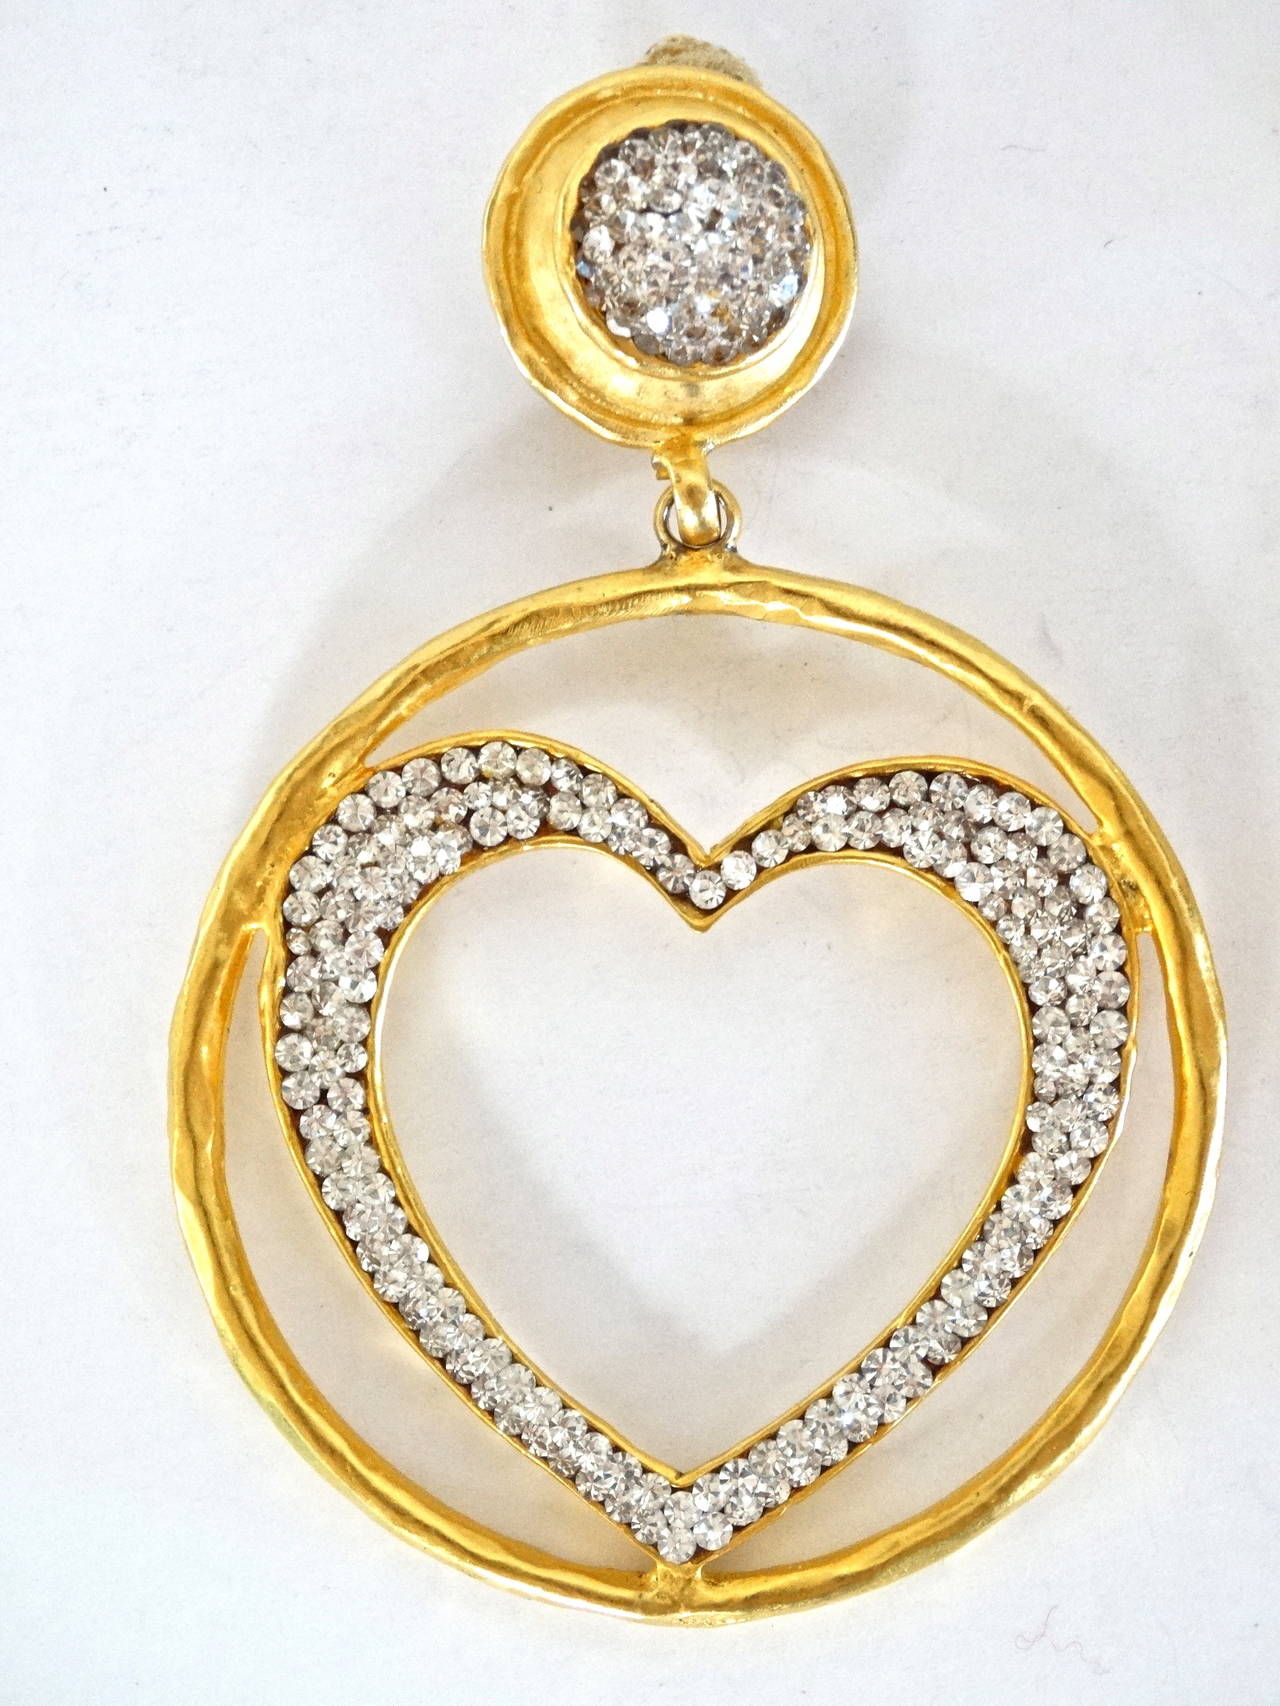 A very beautiful pair of vintage DEANNA HAMRO heart drop hoop earrings with clear crystals. The earrings are hand made and the crystals are are set one by one to make a very eloquent piece of jewelry. These earrings were a very rare and signed. They